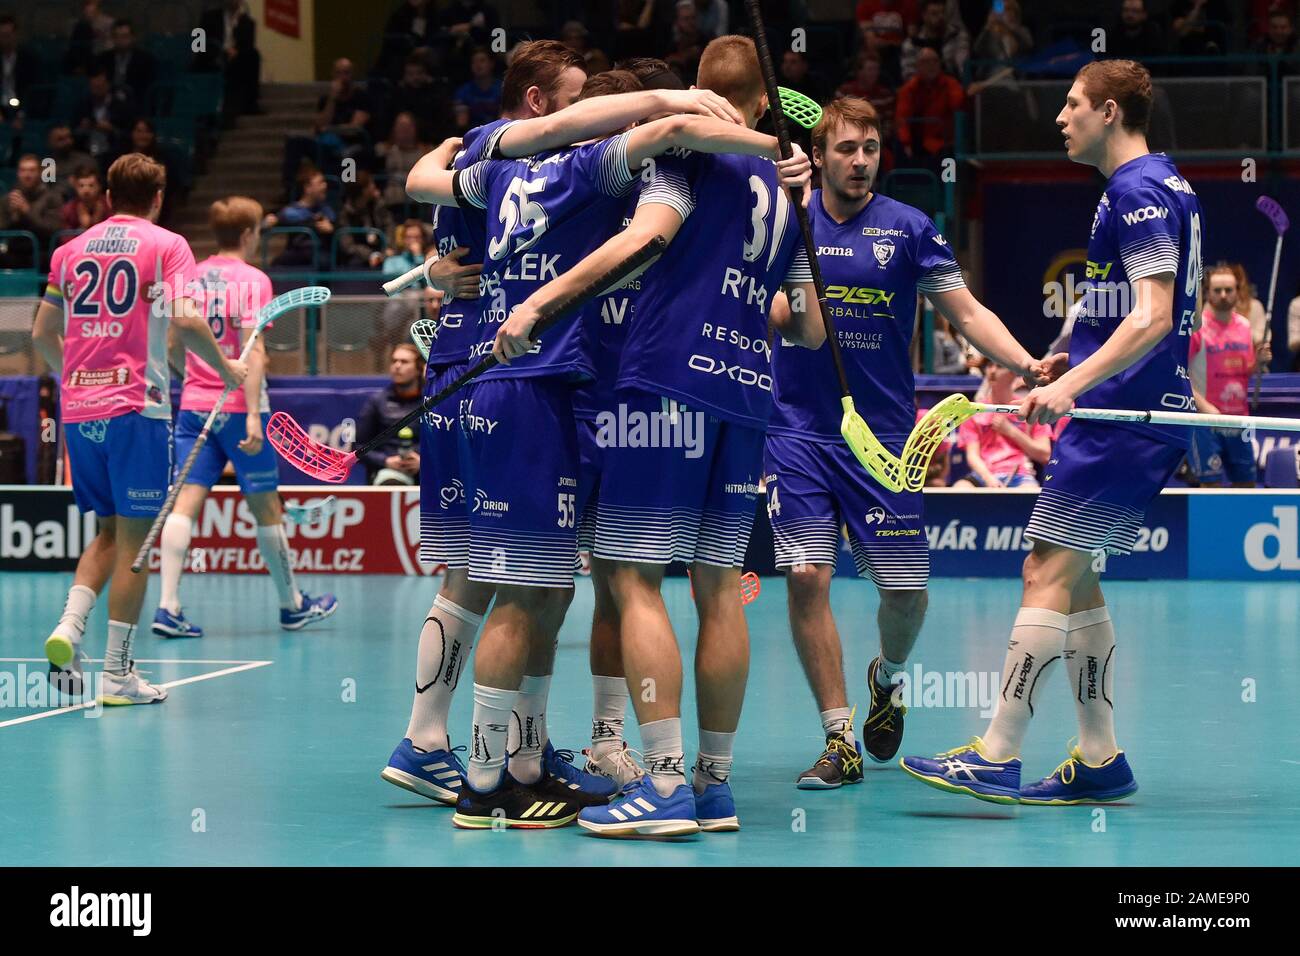 Ostrava, Czech Republic. 12th Jan, 2020. 1st SC Vitkovice floorball players  celebrate a goal during the IFF Floorball Champions Cup 2020, men's 3rd  place match between 1st SC Vitkovice (Czech Republic) and